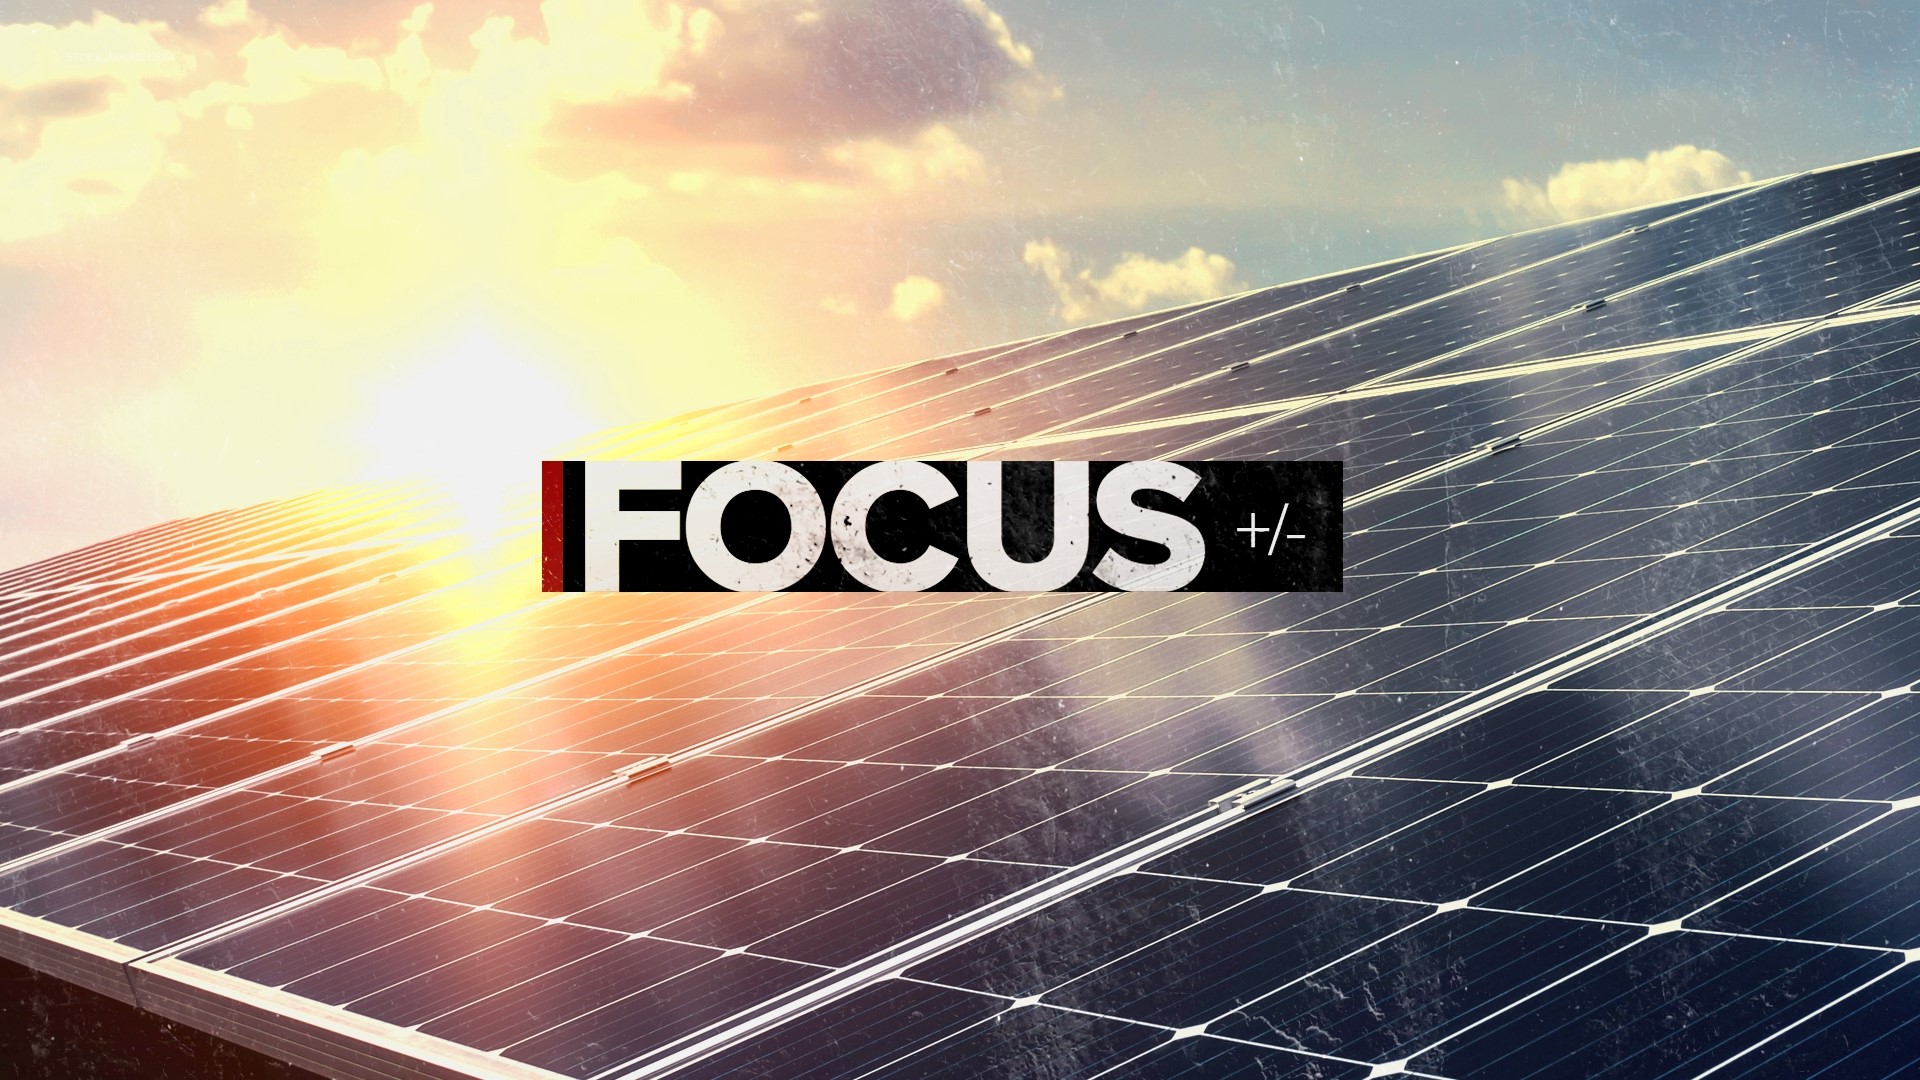 Last week, our FOCUS team uncovered a solar power company that is getting the attention of Attorney Generals in several states. This week the company responds.